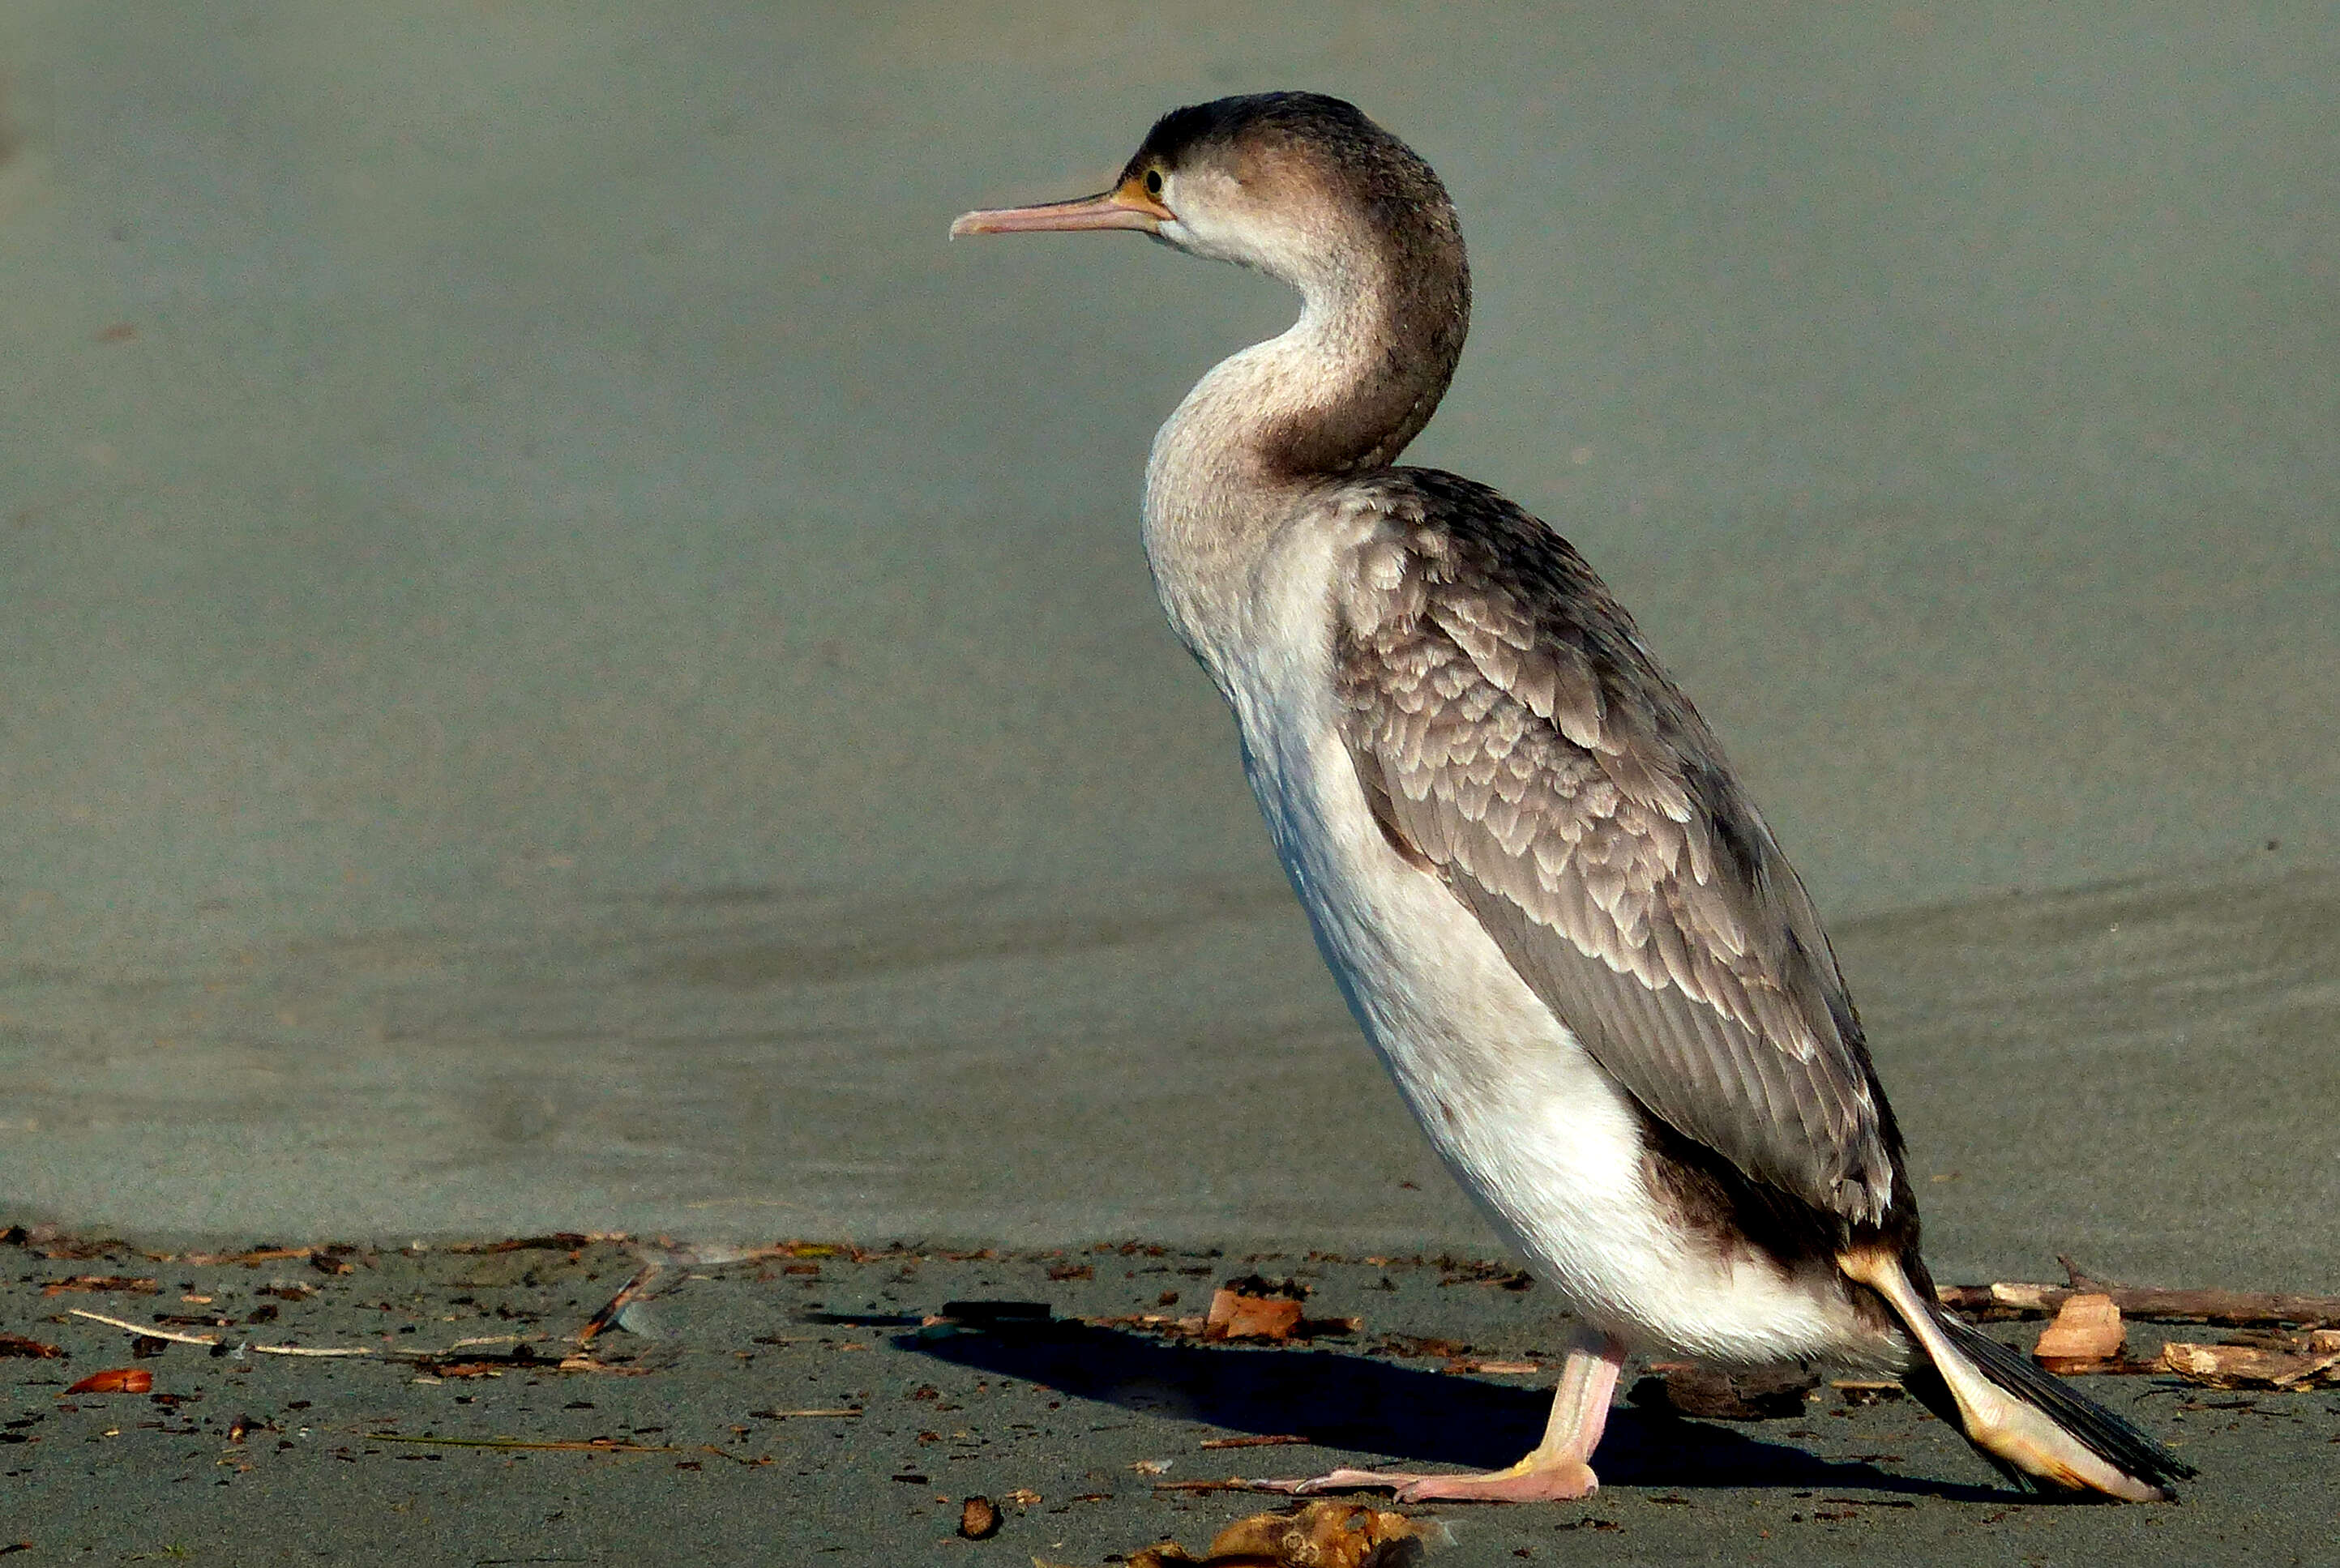 Image of Spotted Shag